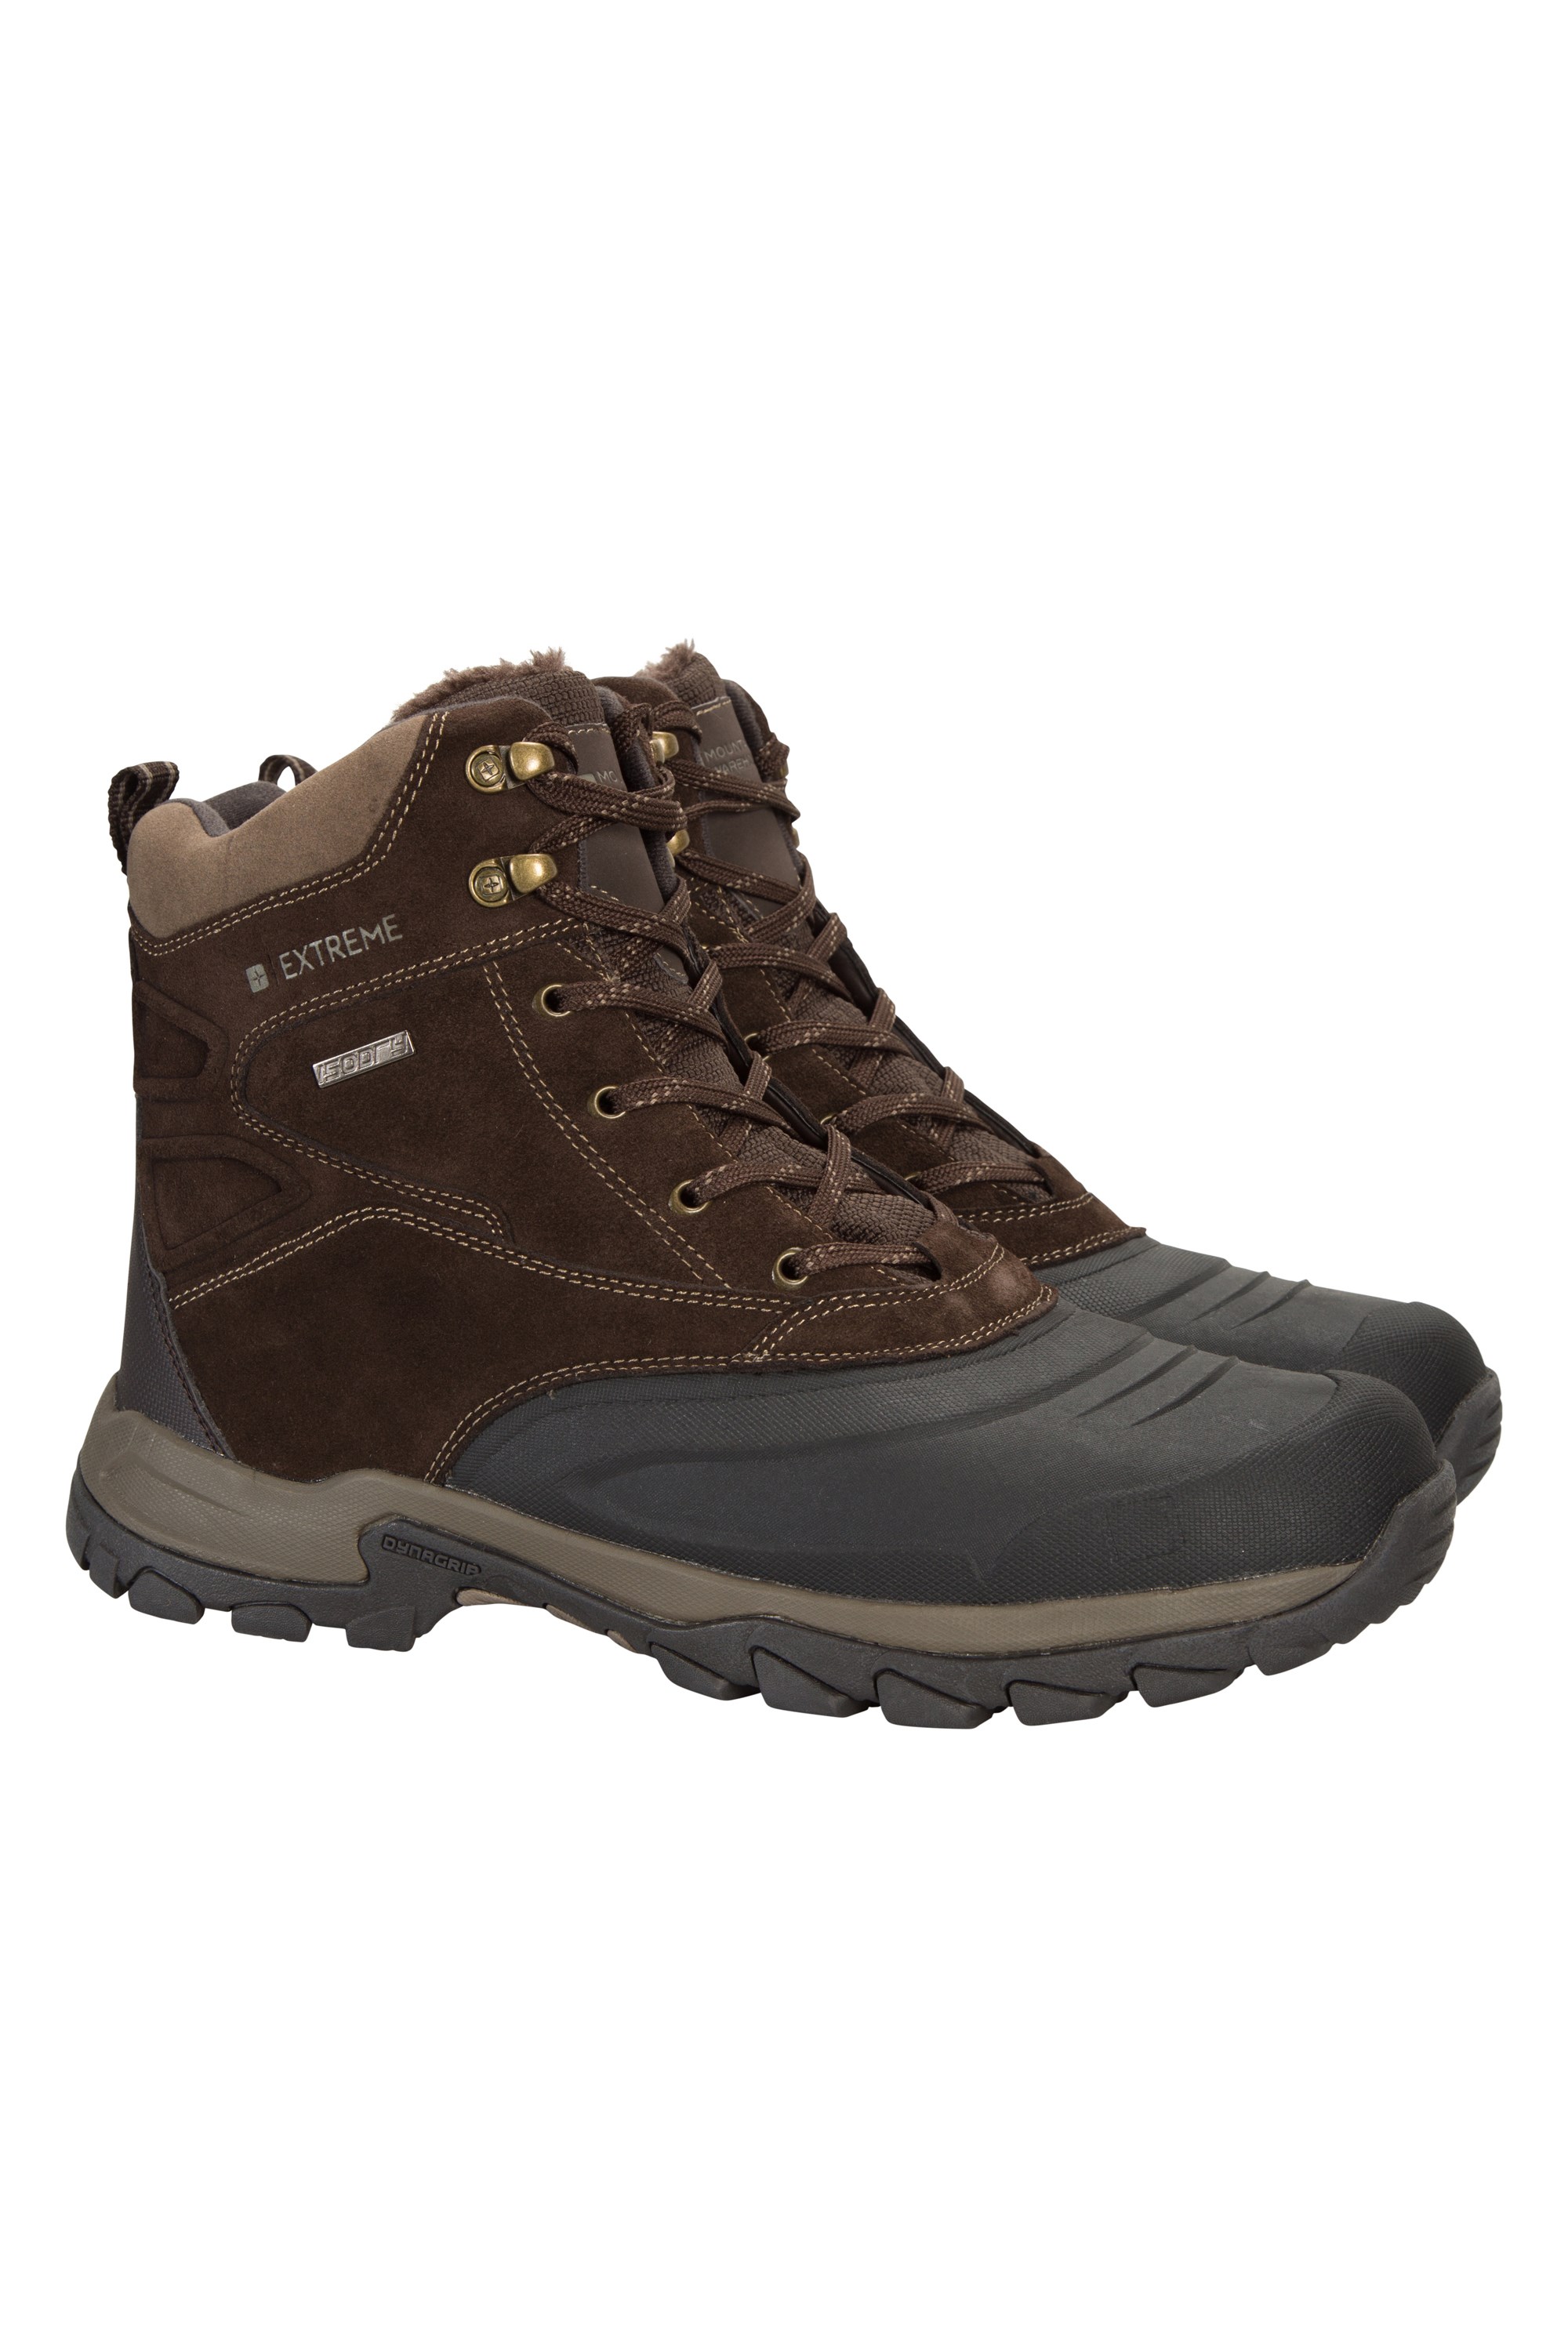 Freeze Low Mens Snow Boots | Mountain 